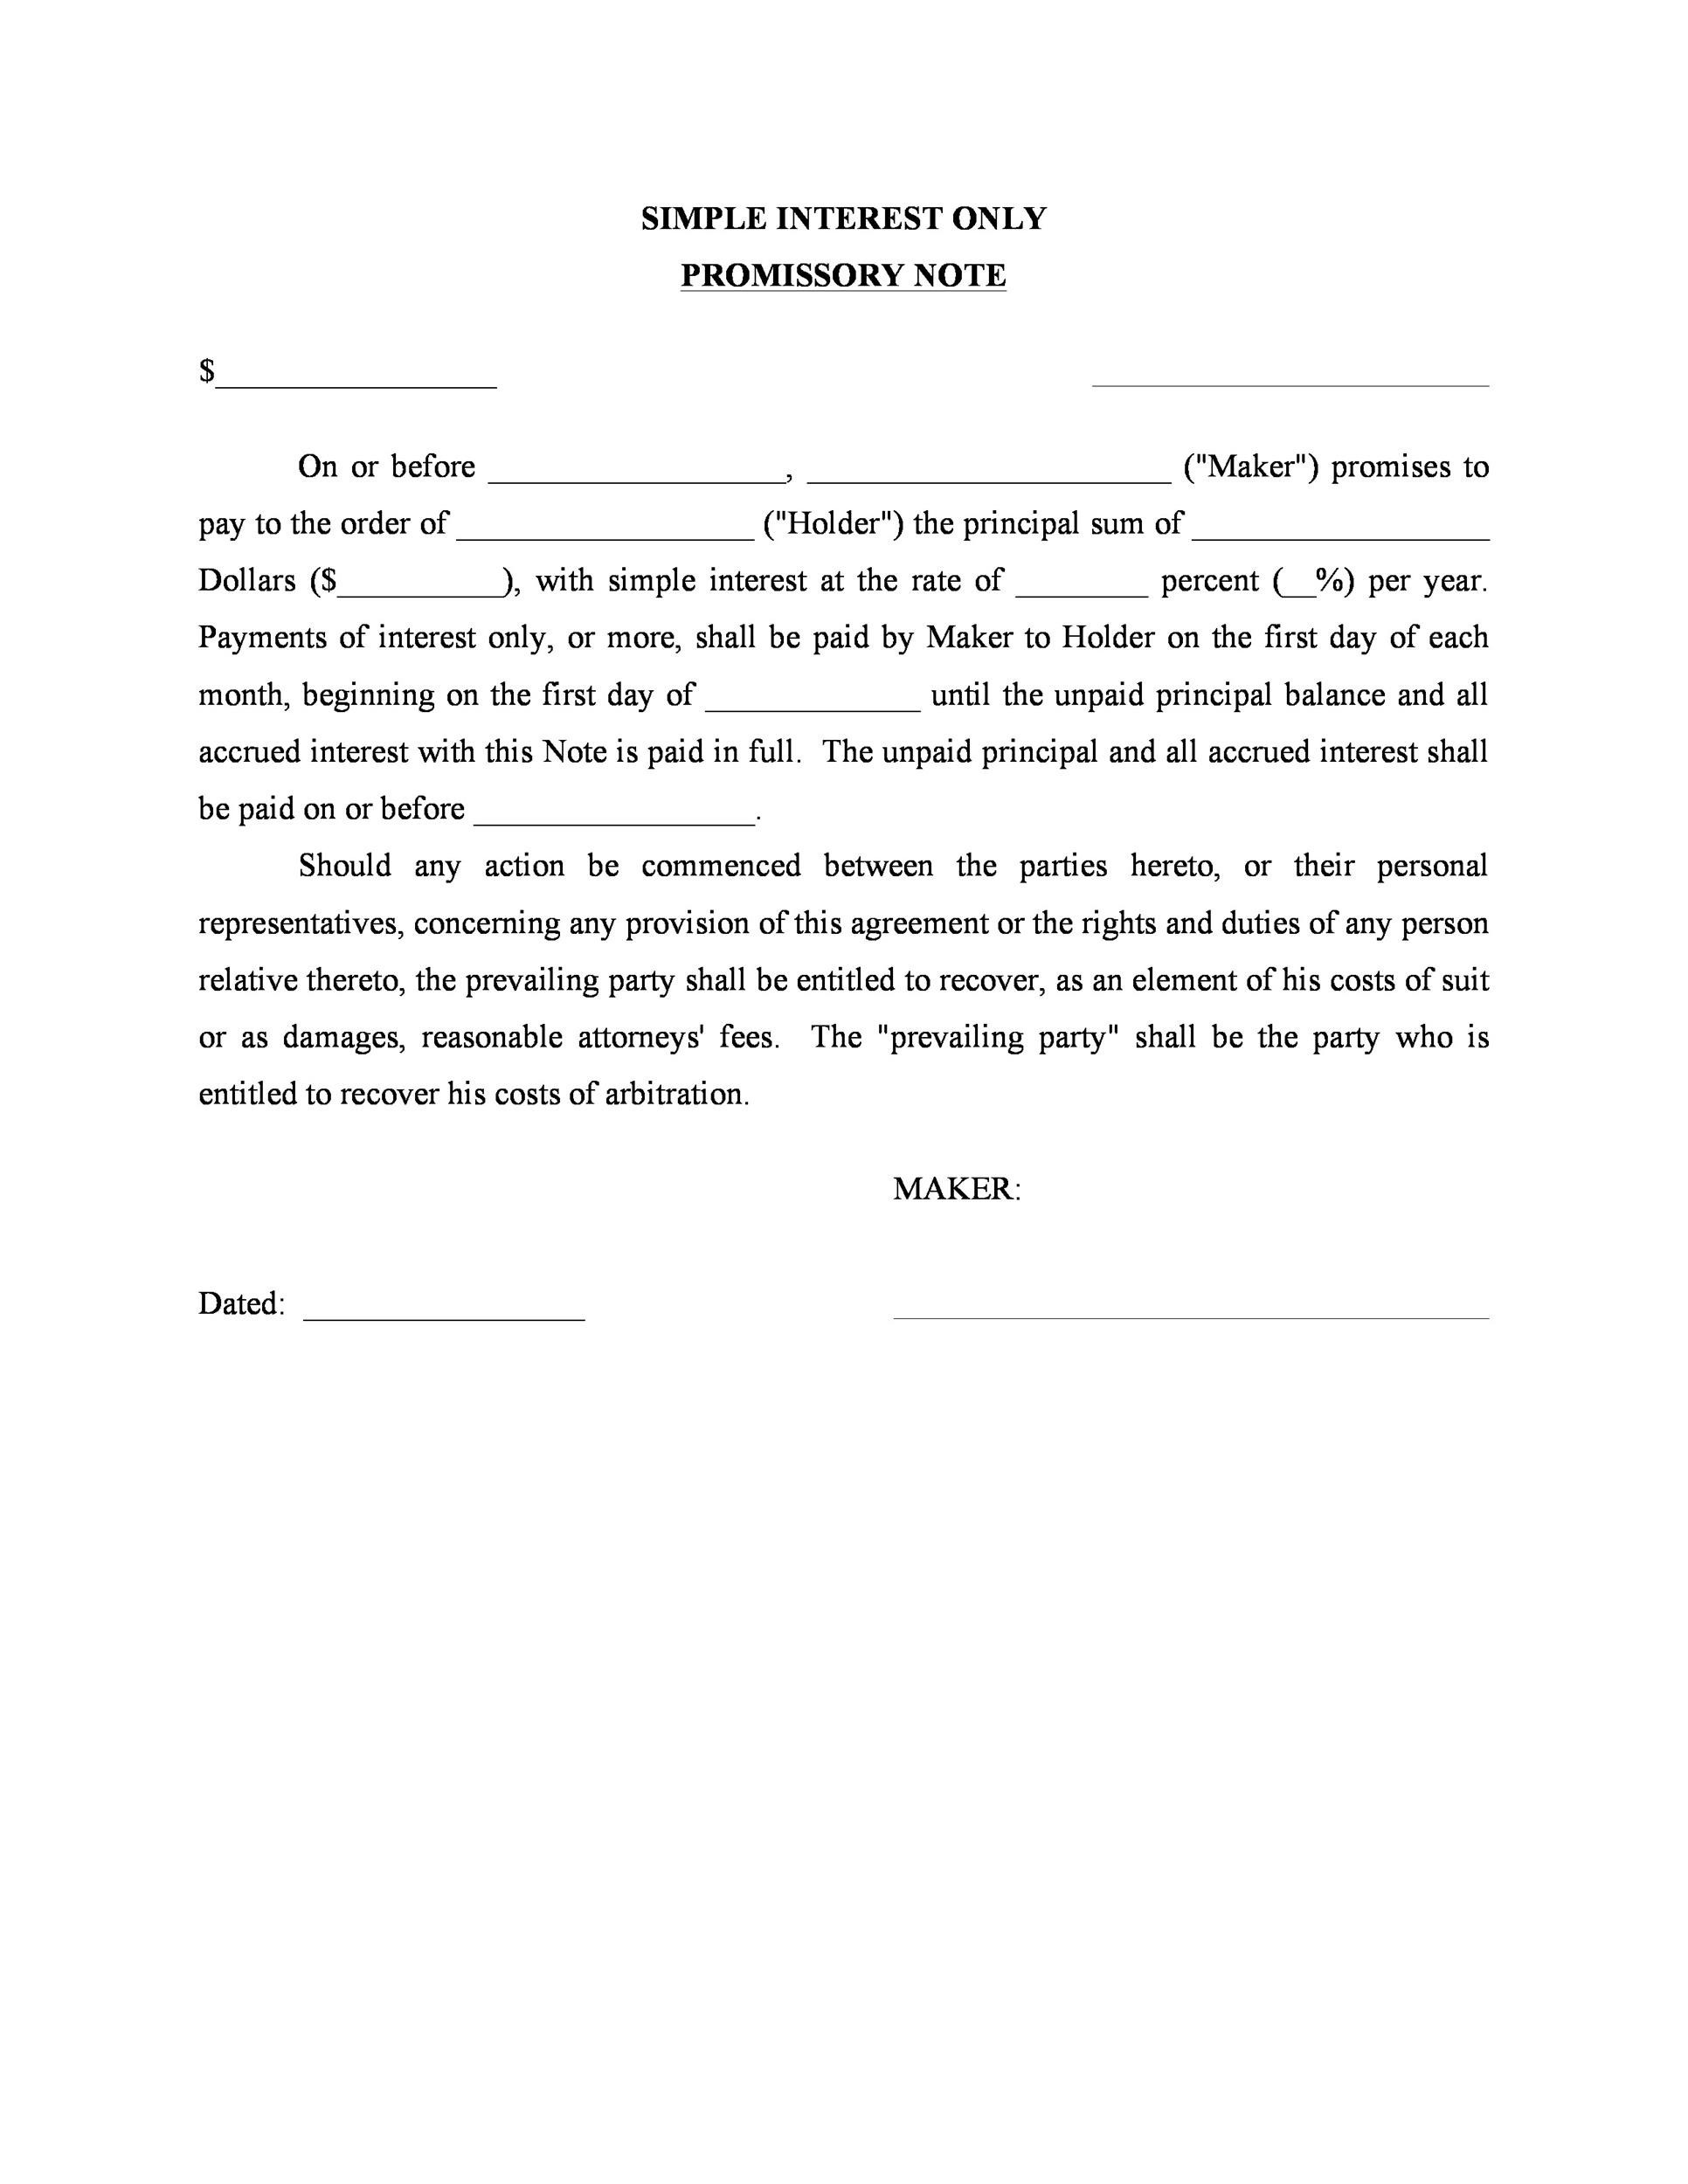 Printable Promissory Note Template